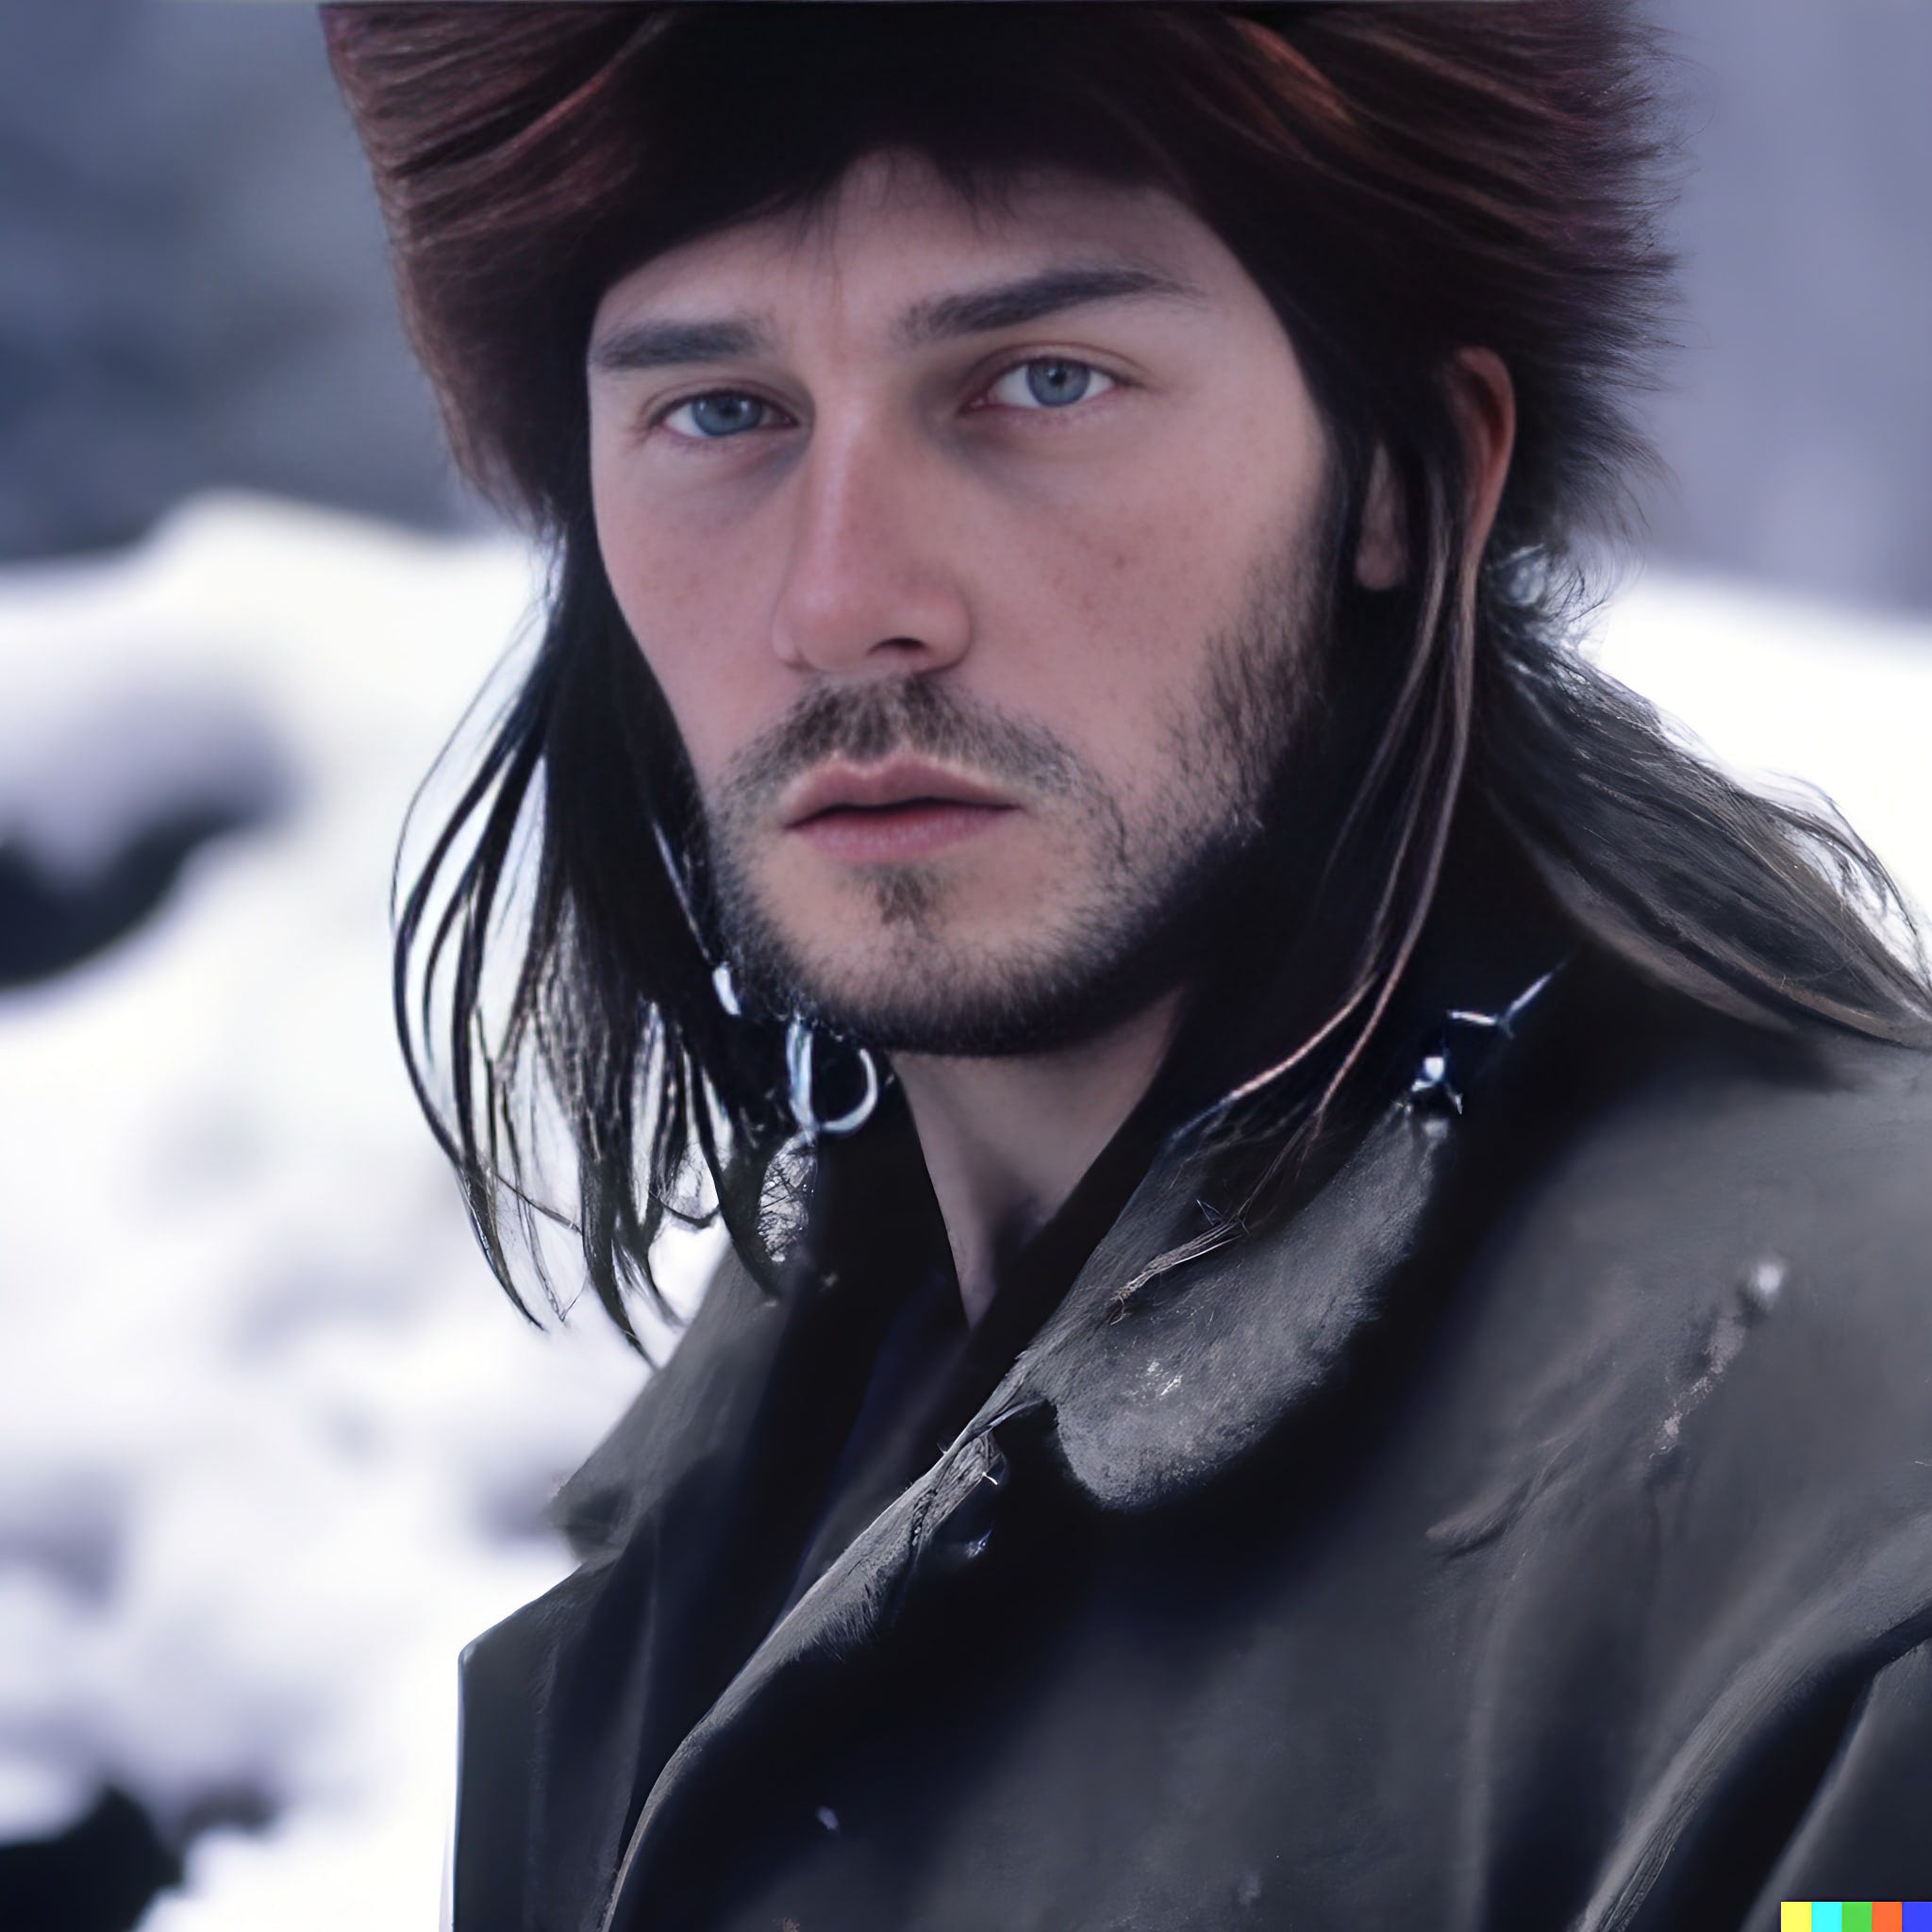 communist-soldier-in-the-serbian-taiga-taken-by-steve-mccurry-1